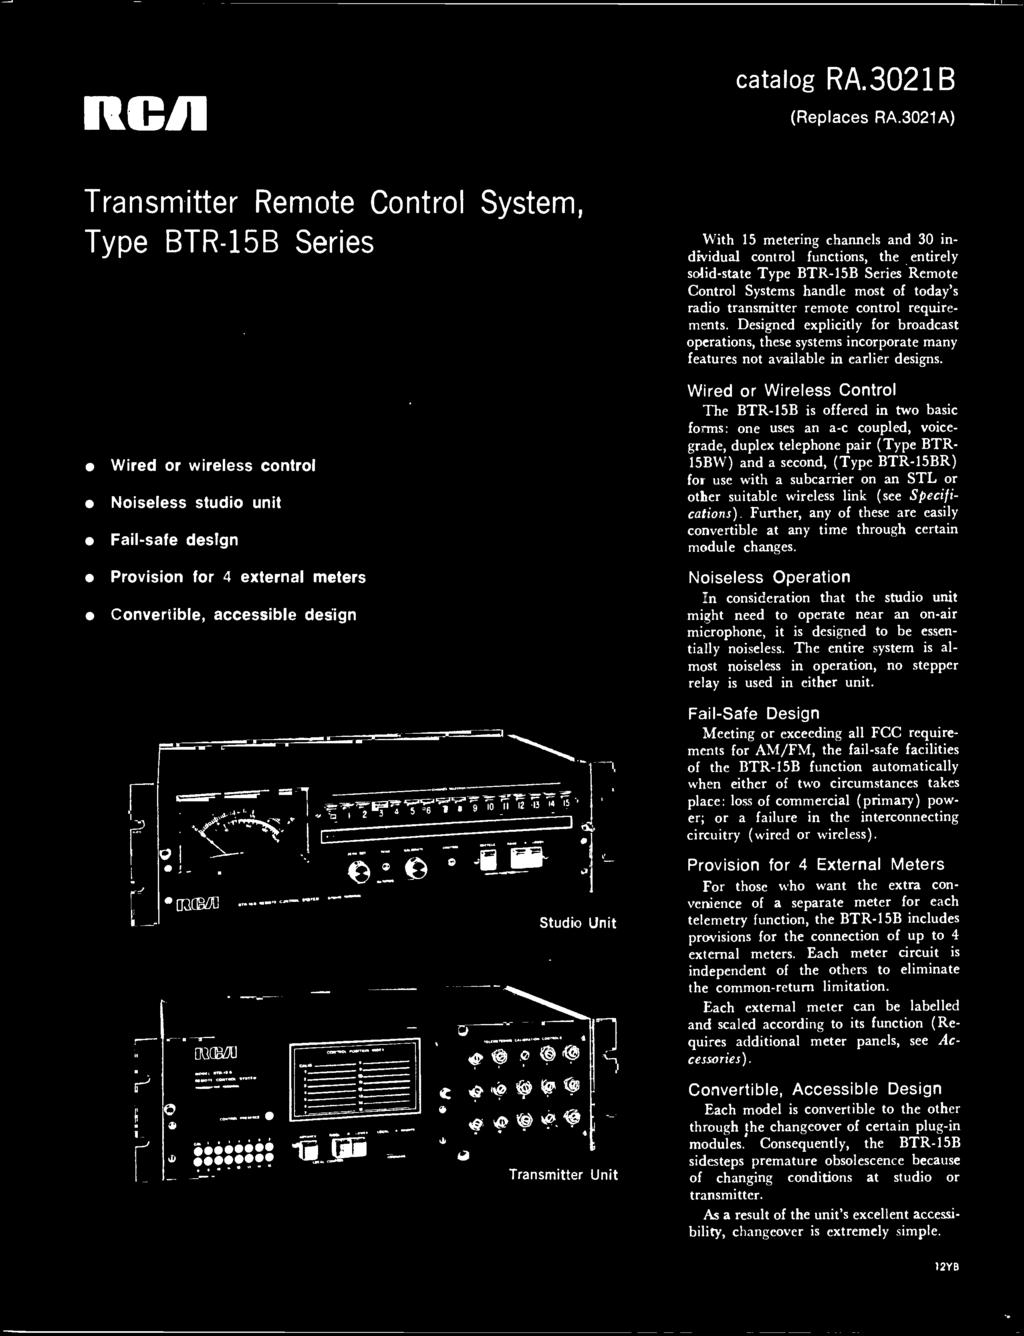 control requirements. Designed explicitly for broadcast operations, these systems incorporate many features not available in earlier designs.